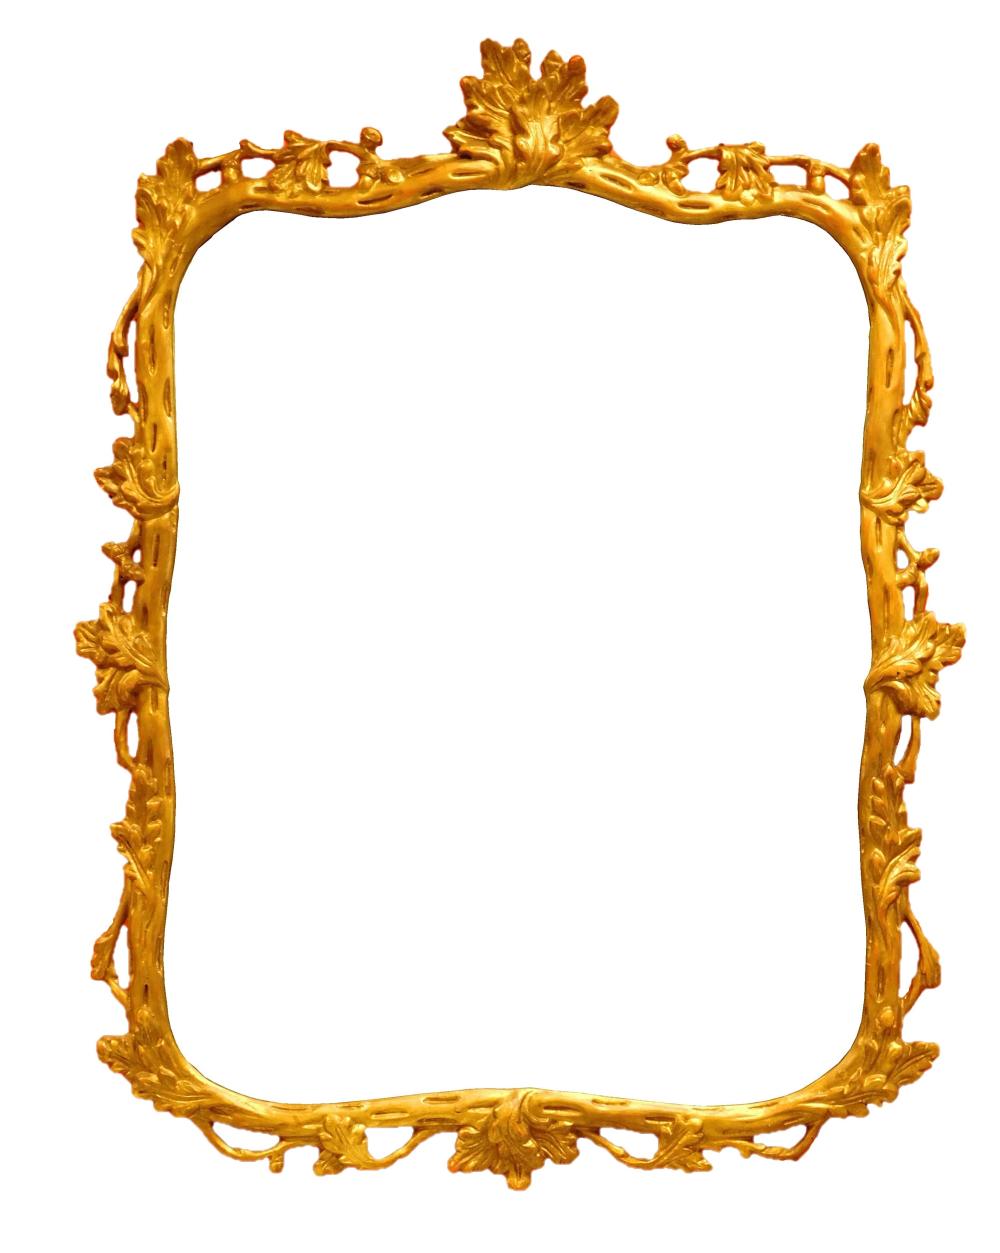 WALL MIRROR CHIPPENDALE STYLE  31d295